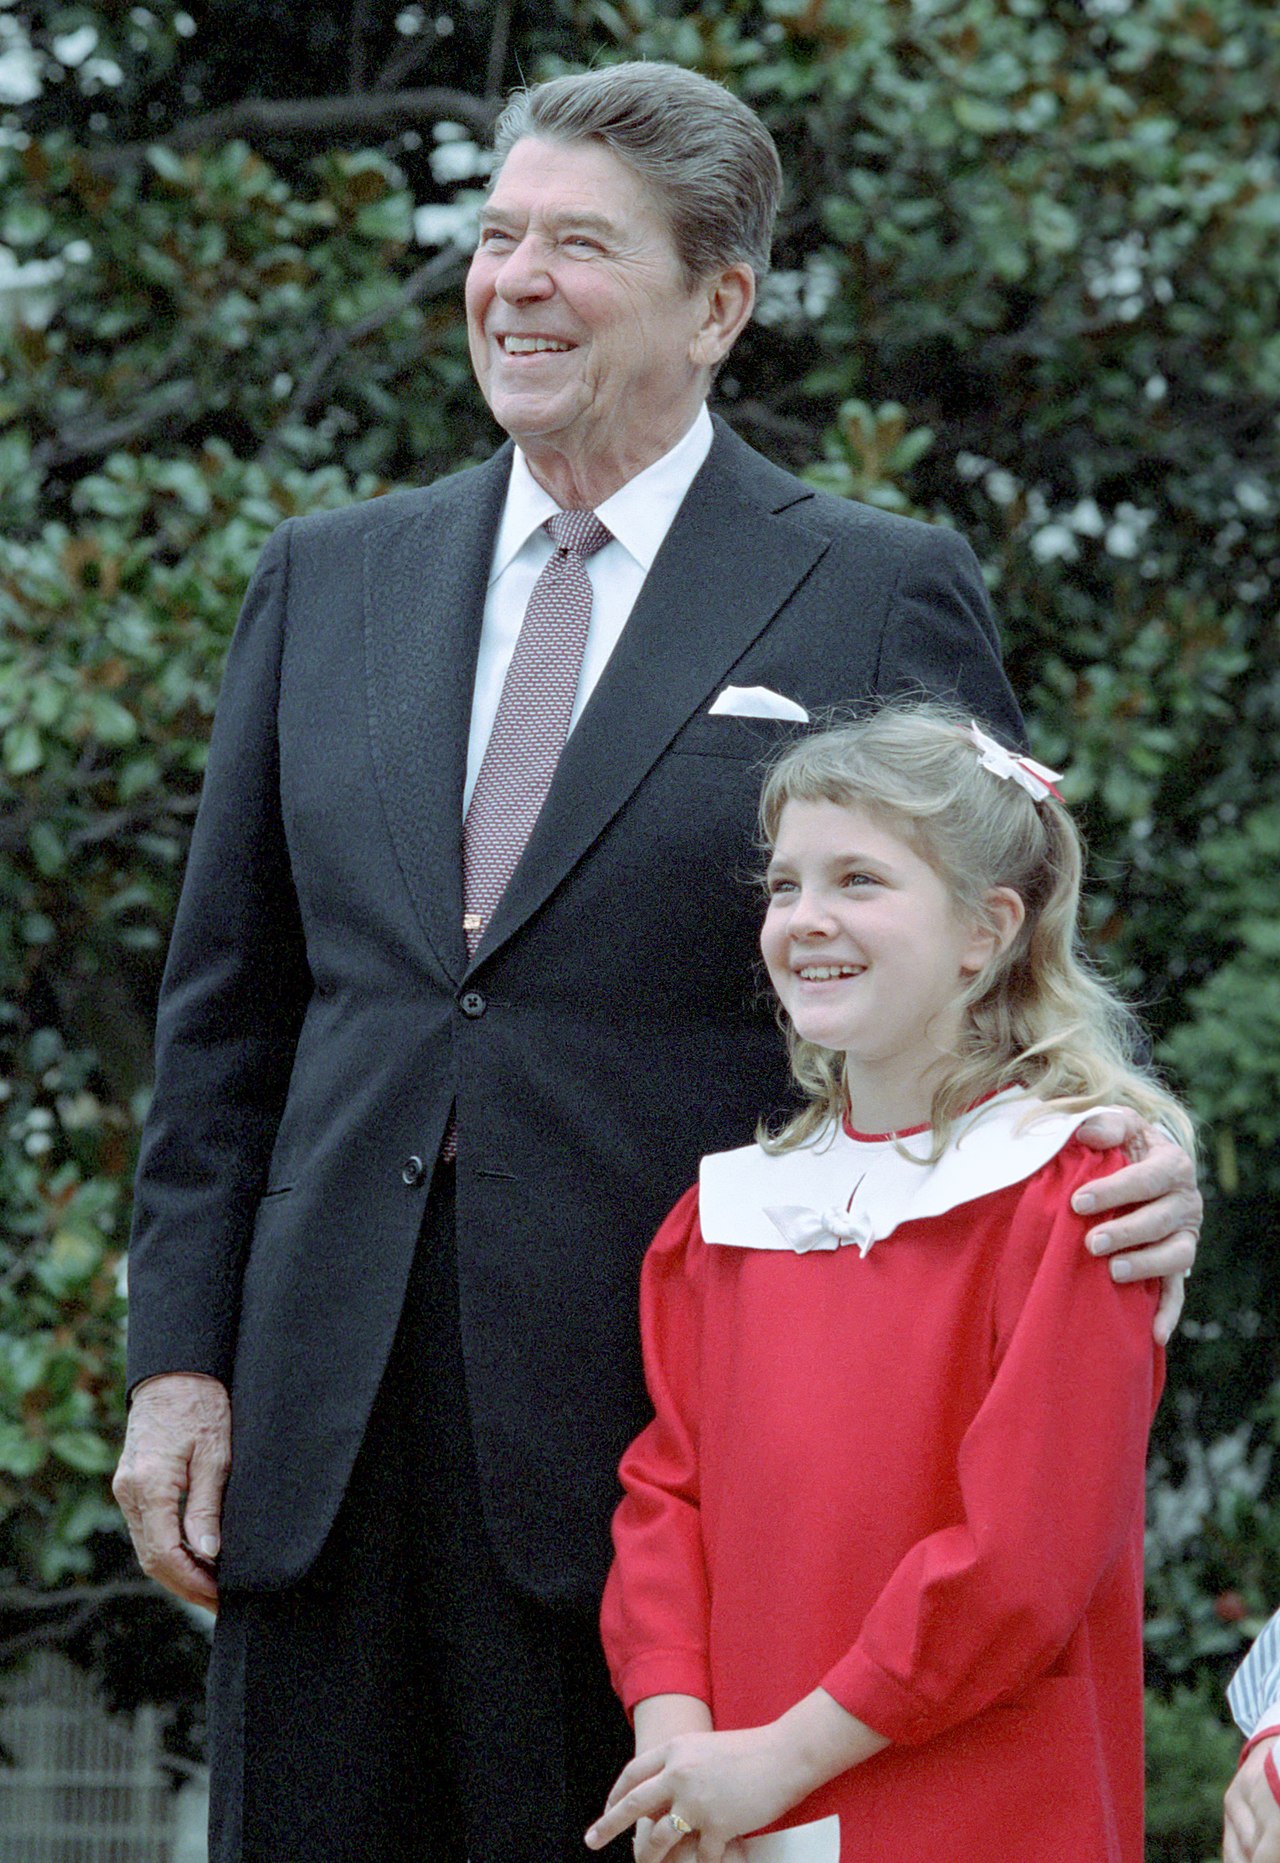 10/17/1984 President with Drew Barrymore at a ceremony launching the Young Astronauts program on the South Lawn